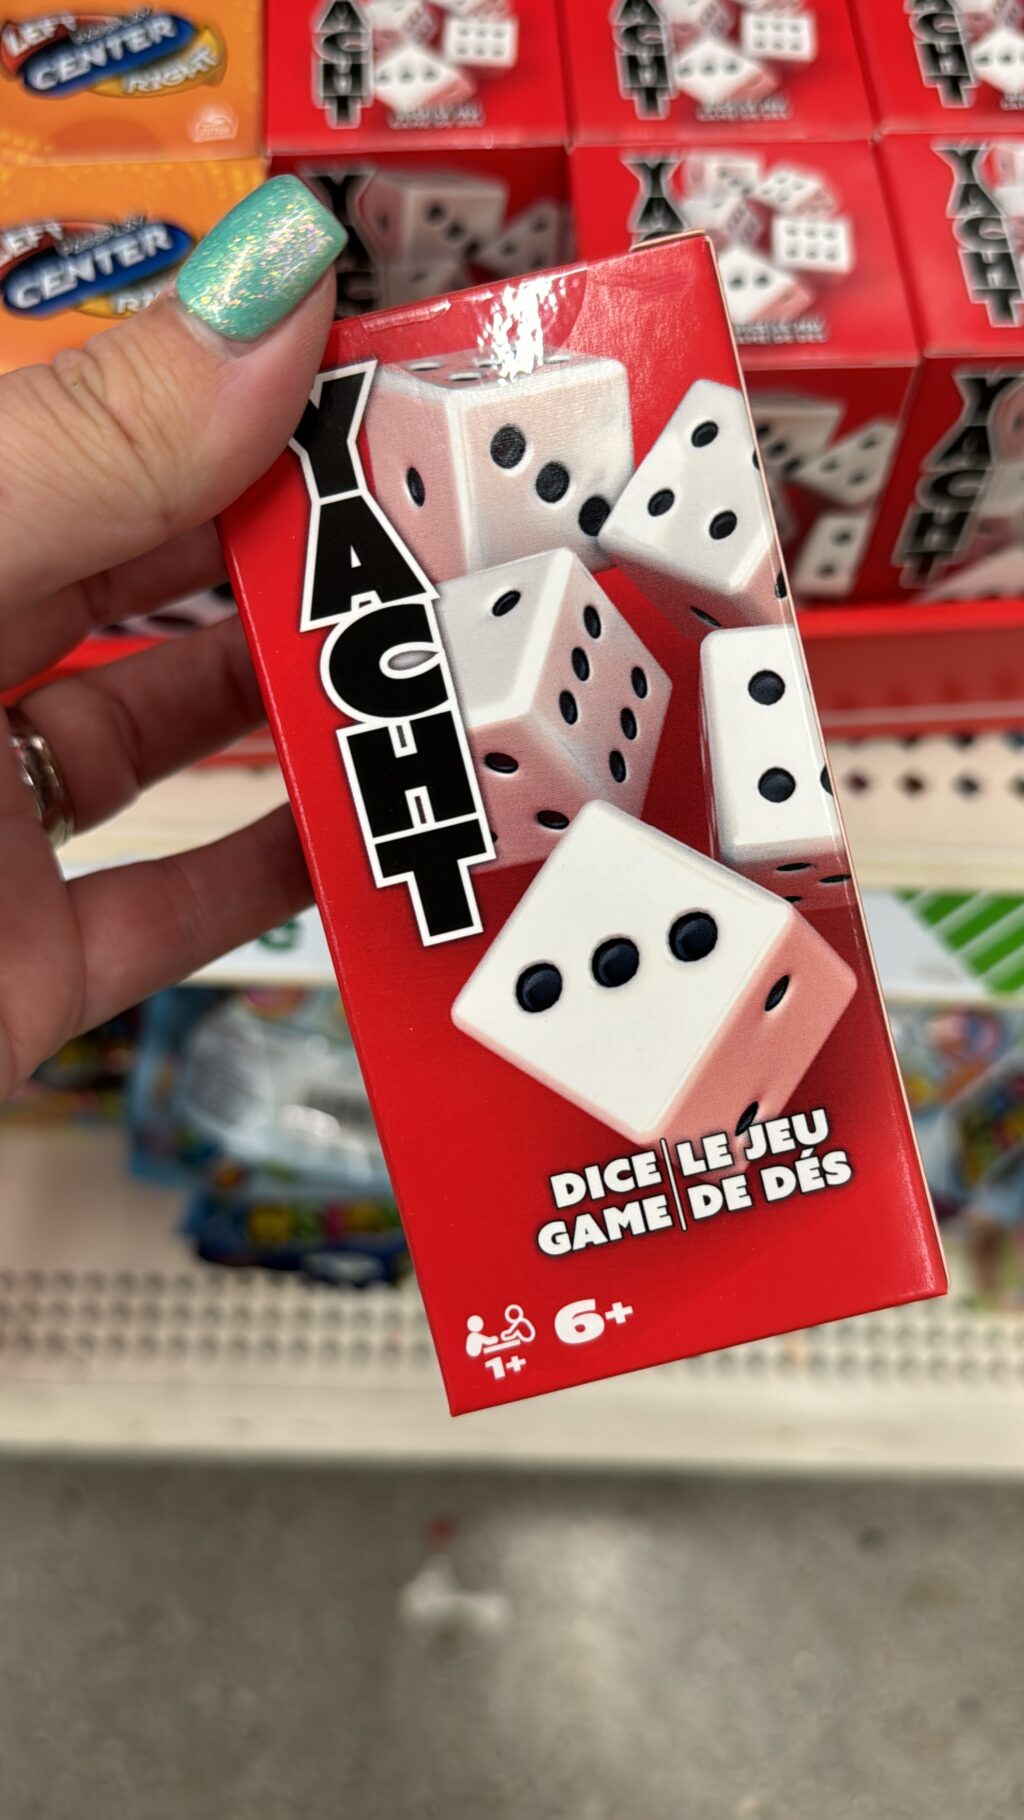 yacht dice game at dollar tree